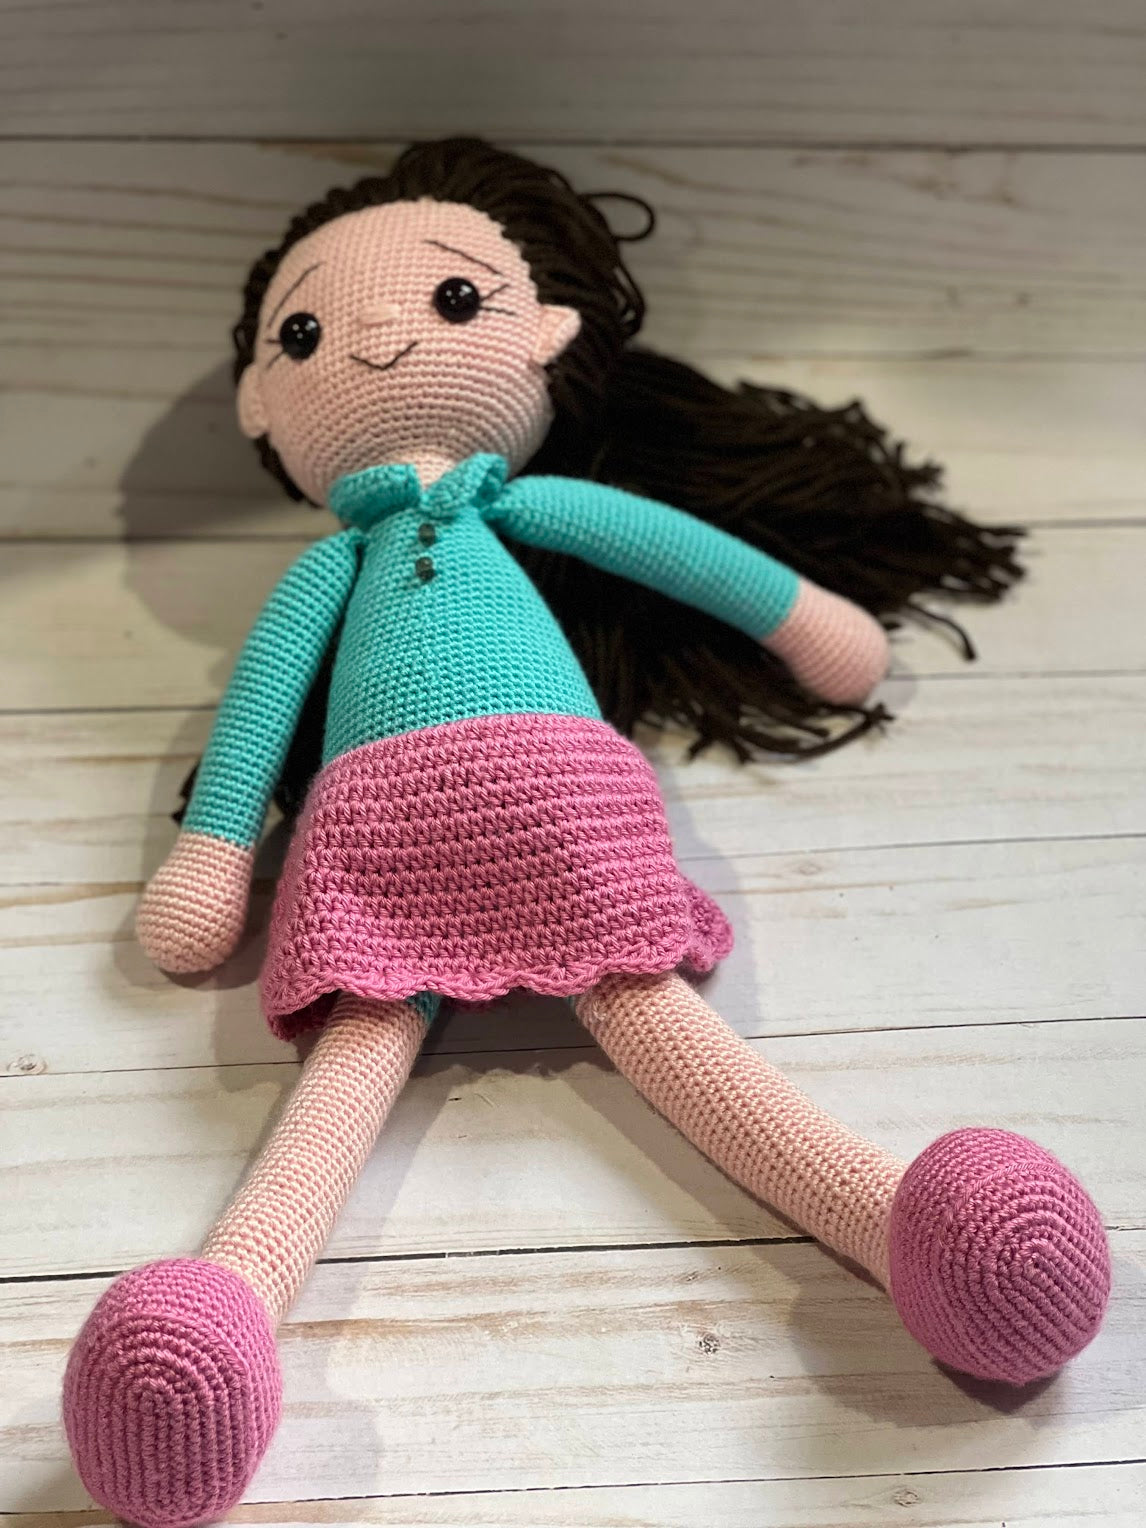 Big Doll With Long Hair - Crochet Knitted Amigurumi Toy